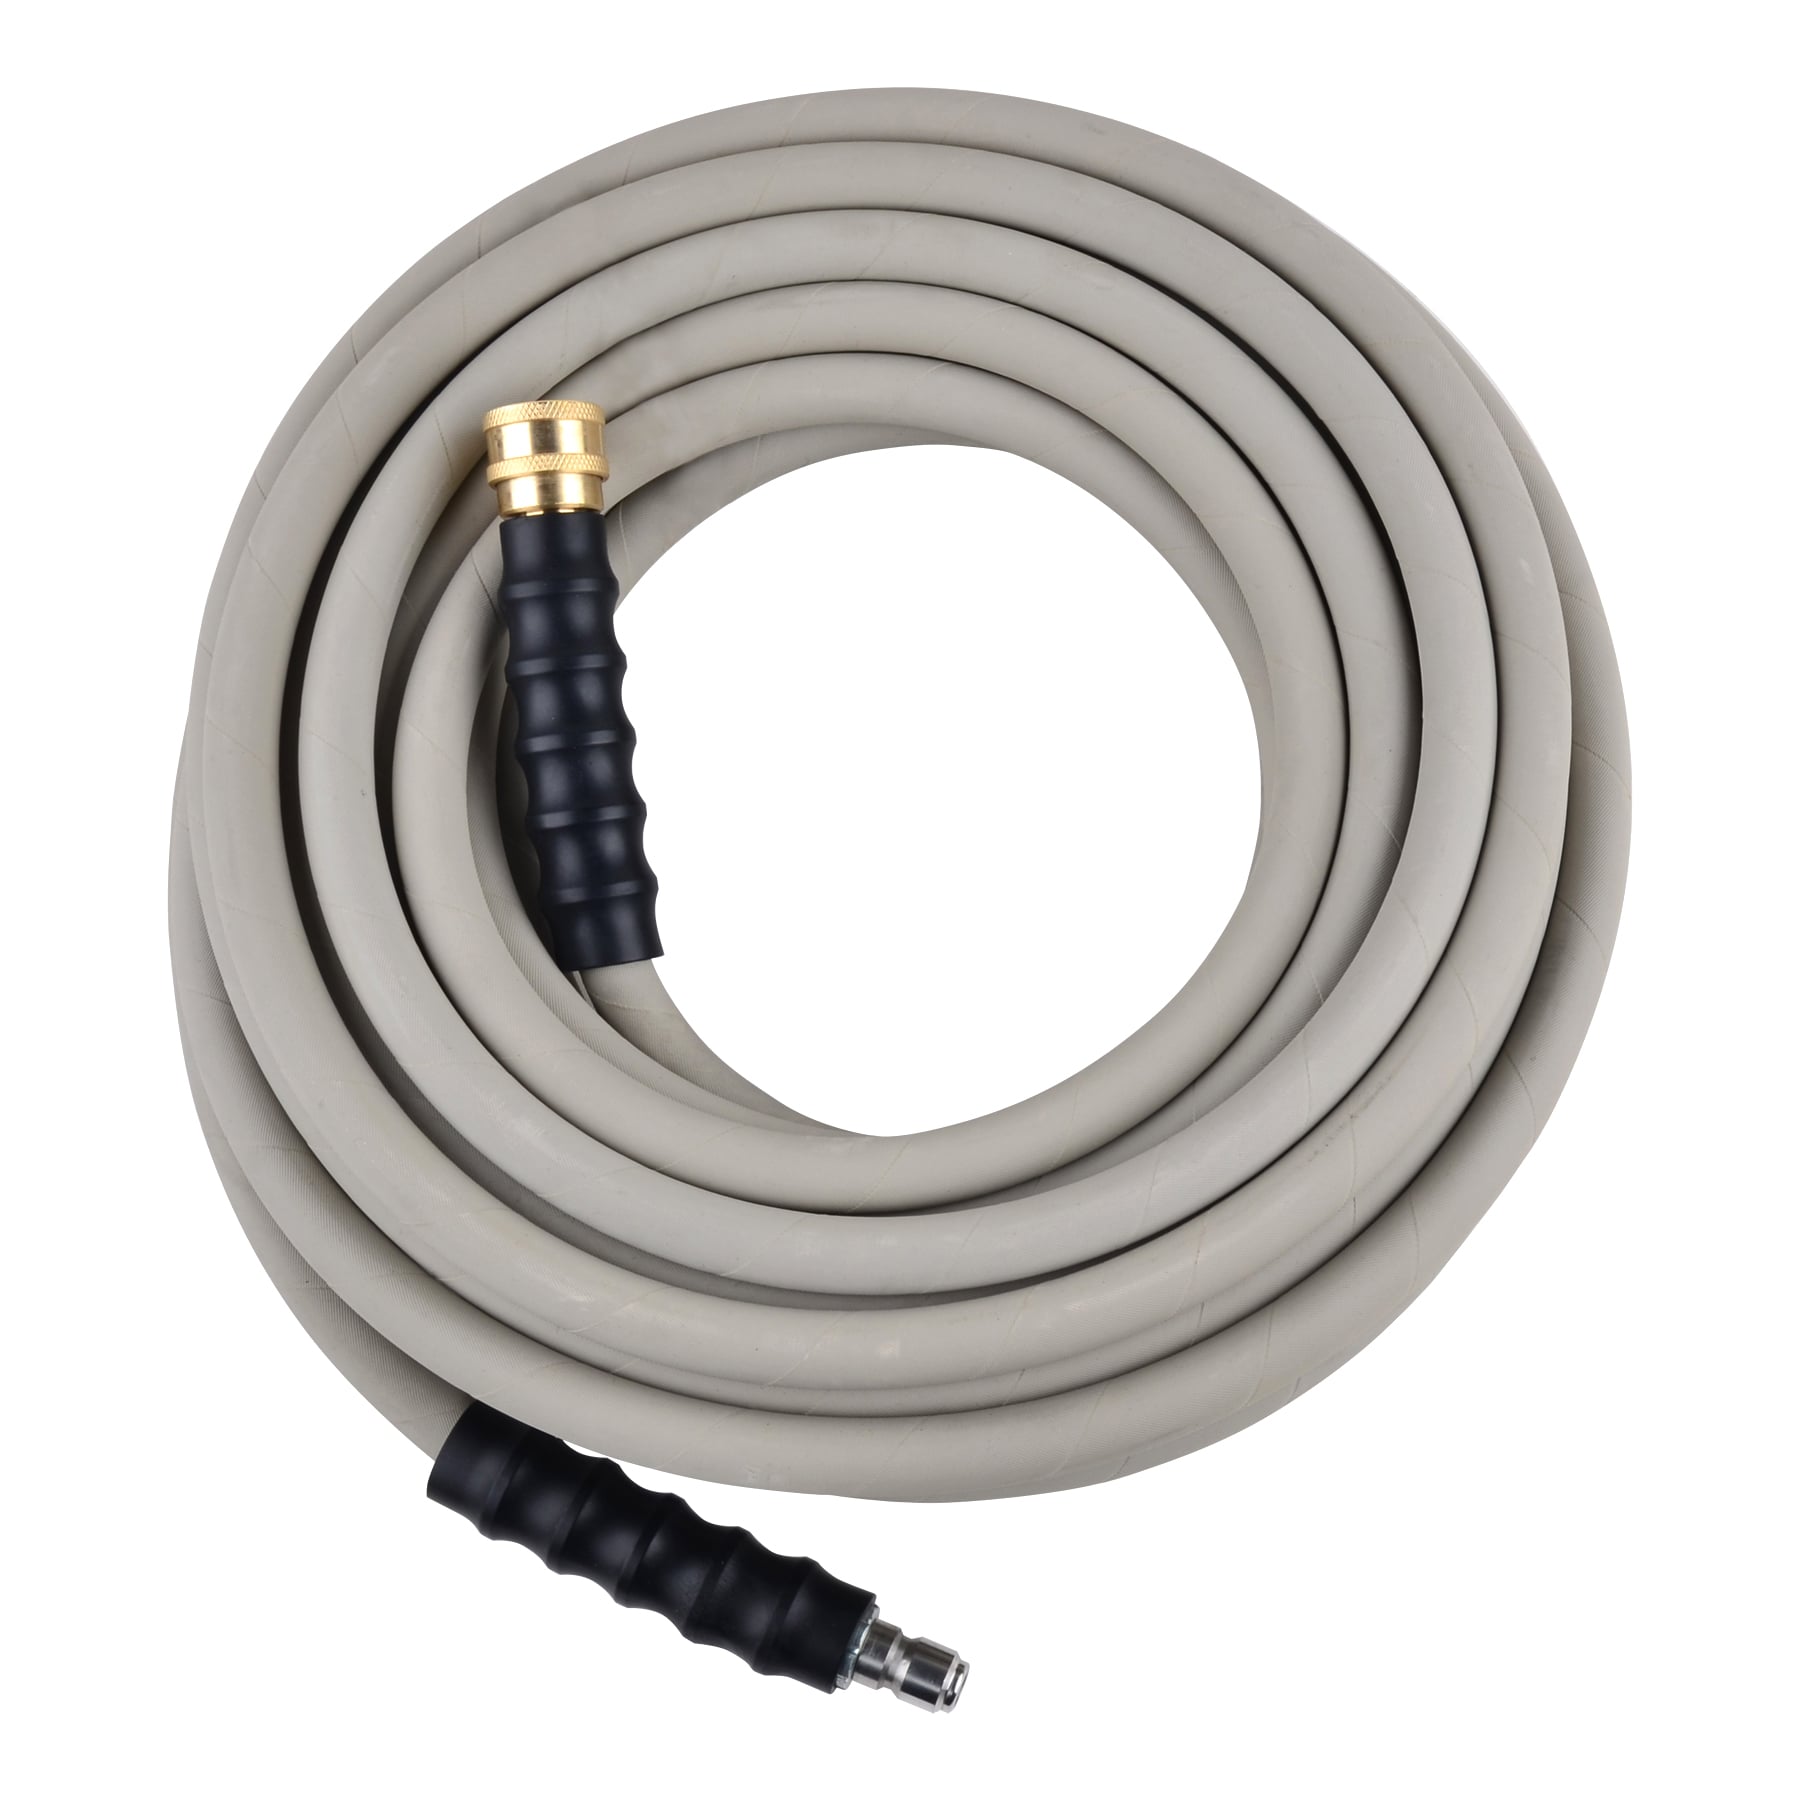 Pressure Washer Ultra-Soft Hose for Replacement - 100ft